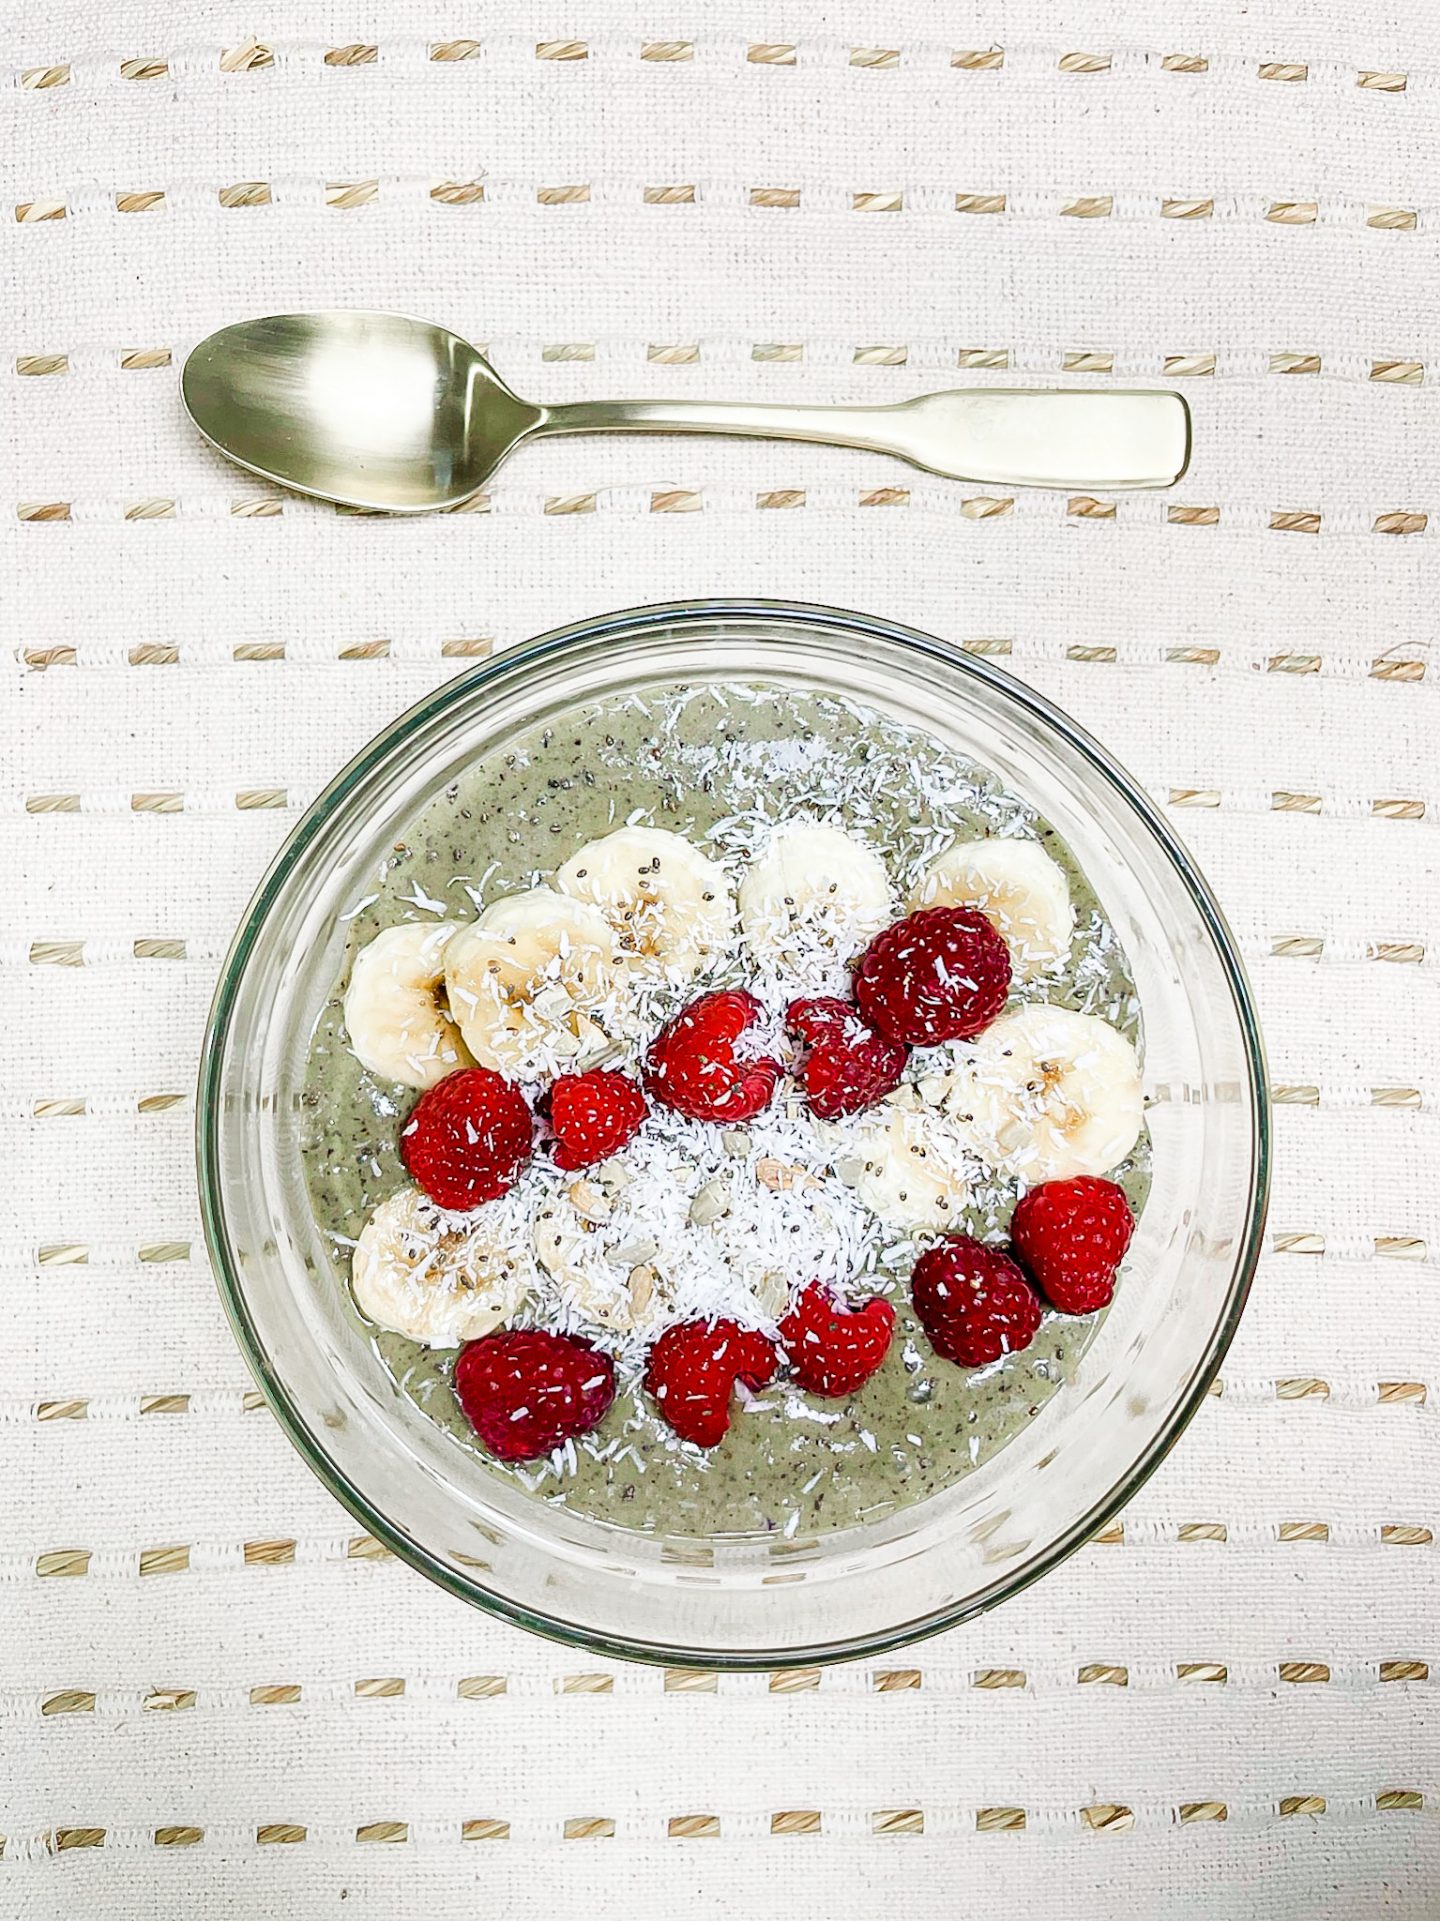 Healthy Breakfast Ideas: Green Smoothie Bowl Recipe by Alabama Food + Health blogger, Heather Brown // My Life Well Loved